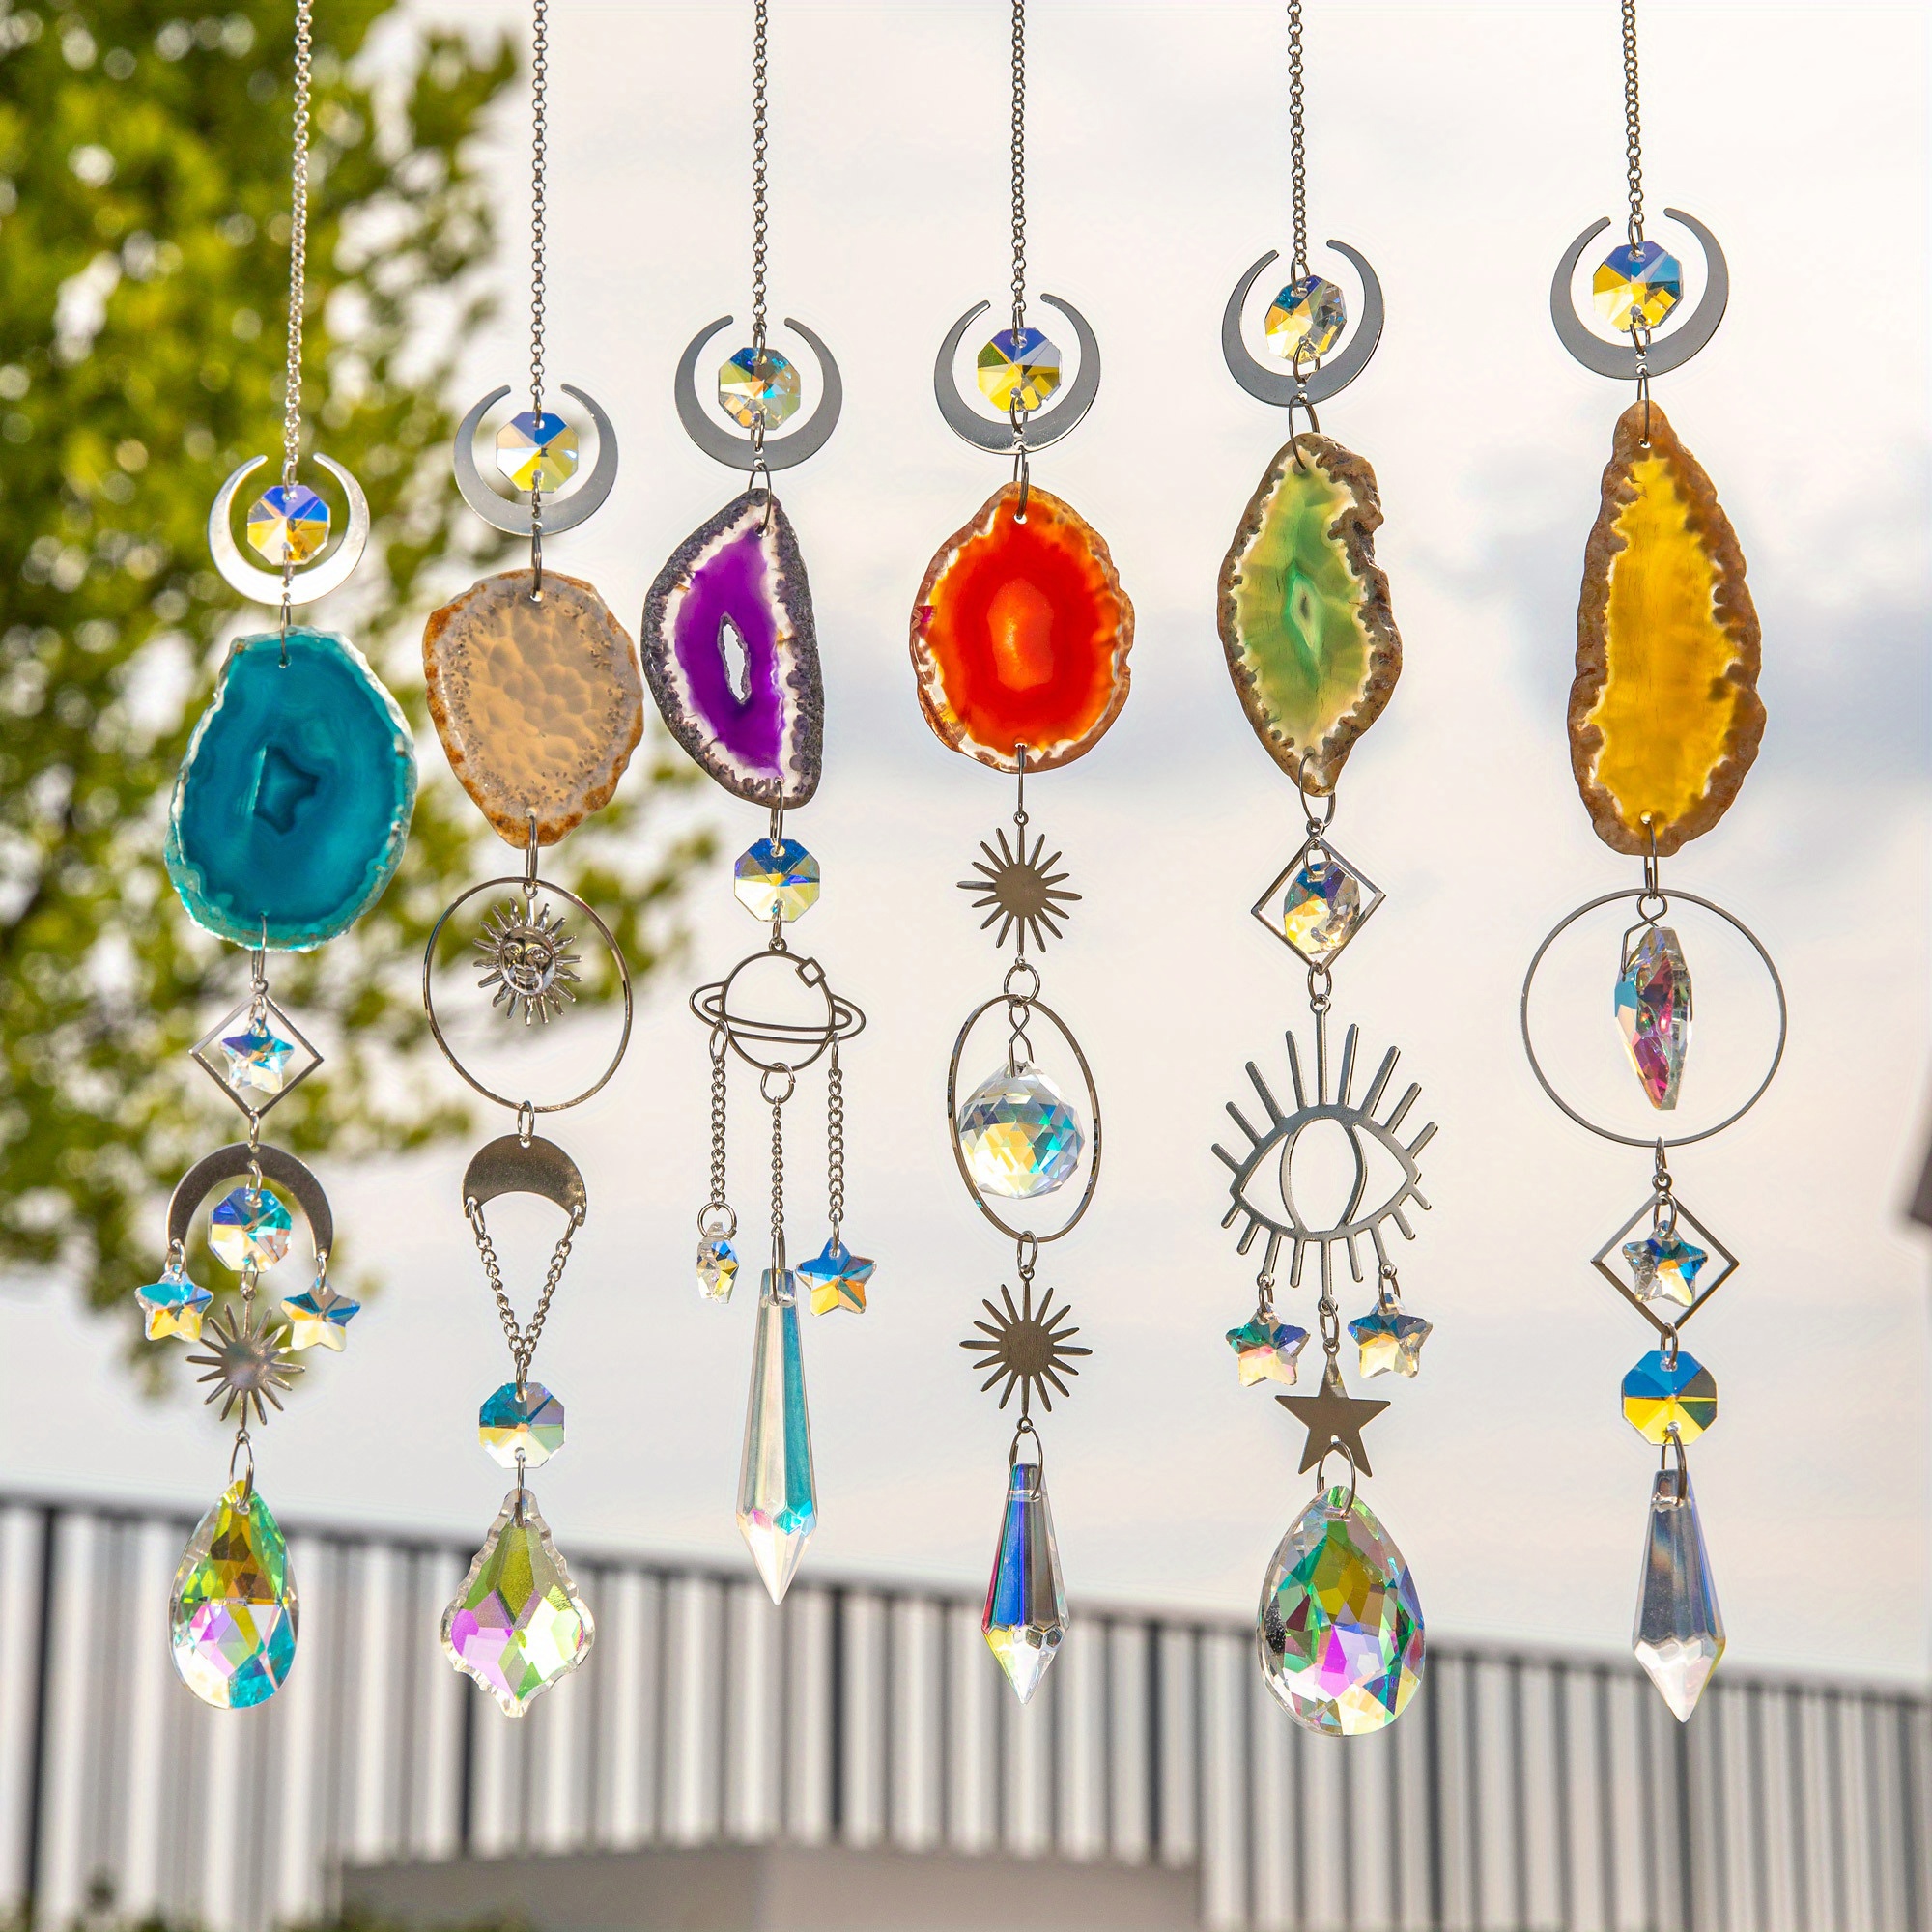 6 Pcs Crystal Suncatcher, Sun Catchers Indoor Window Hanging Sun Catchers  With Crystals Light Catcher With Prisms And Agate For Indoor Outdoor